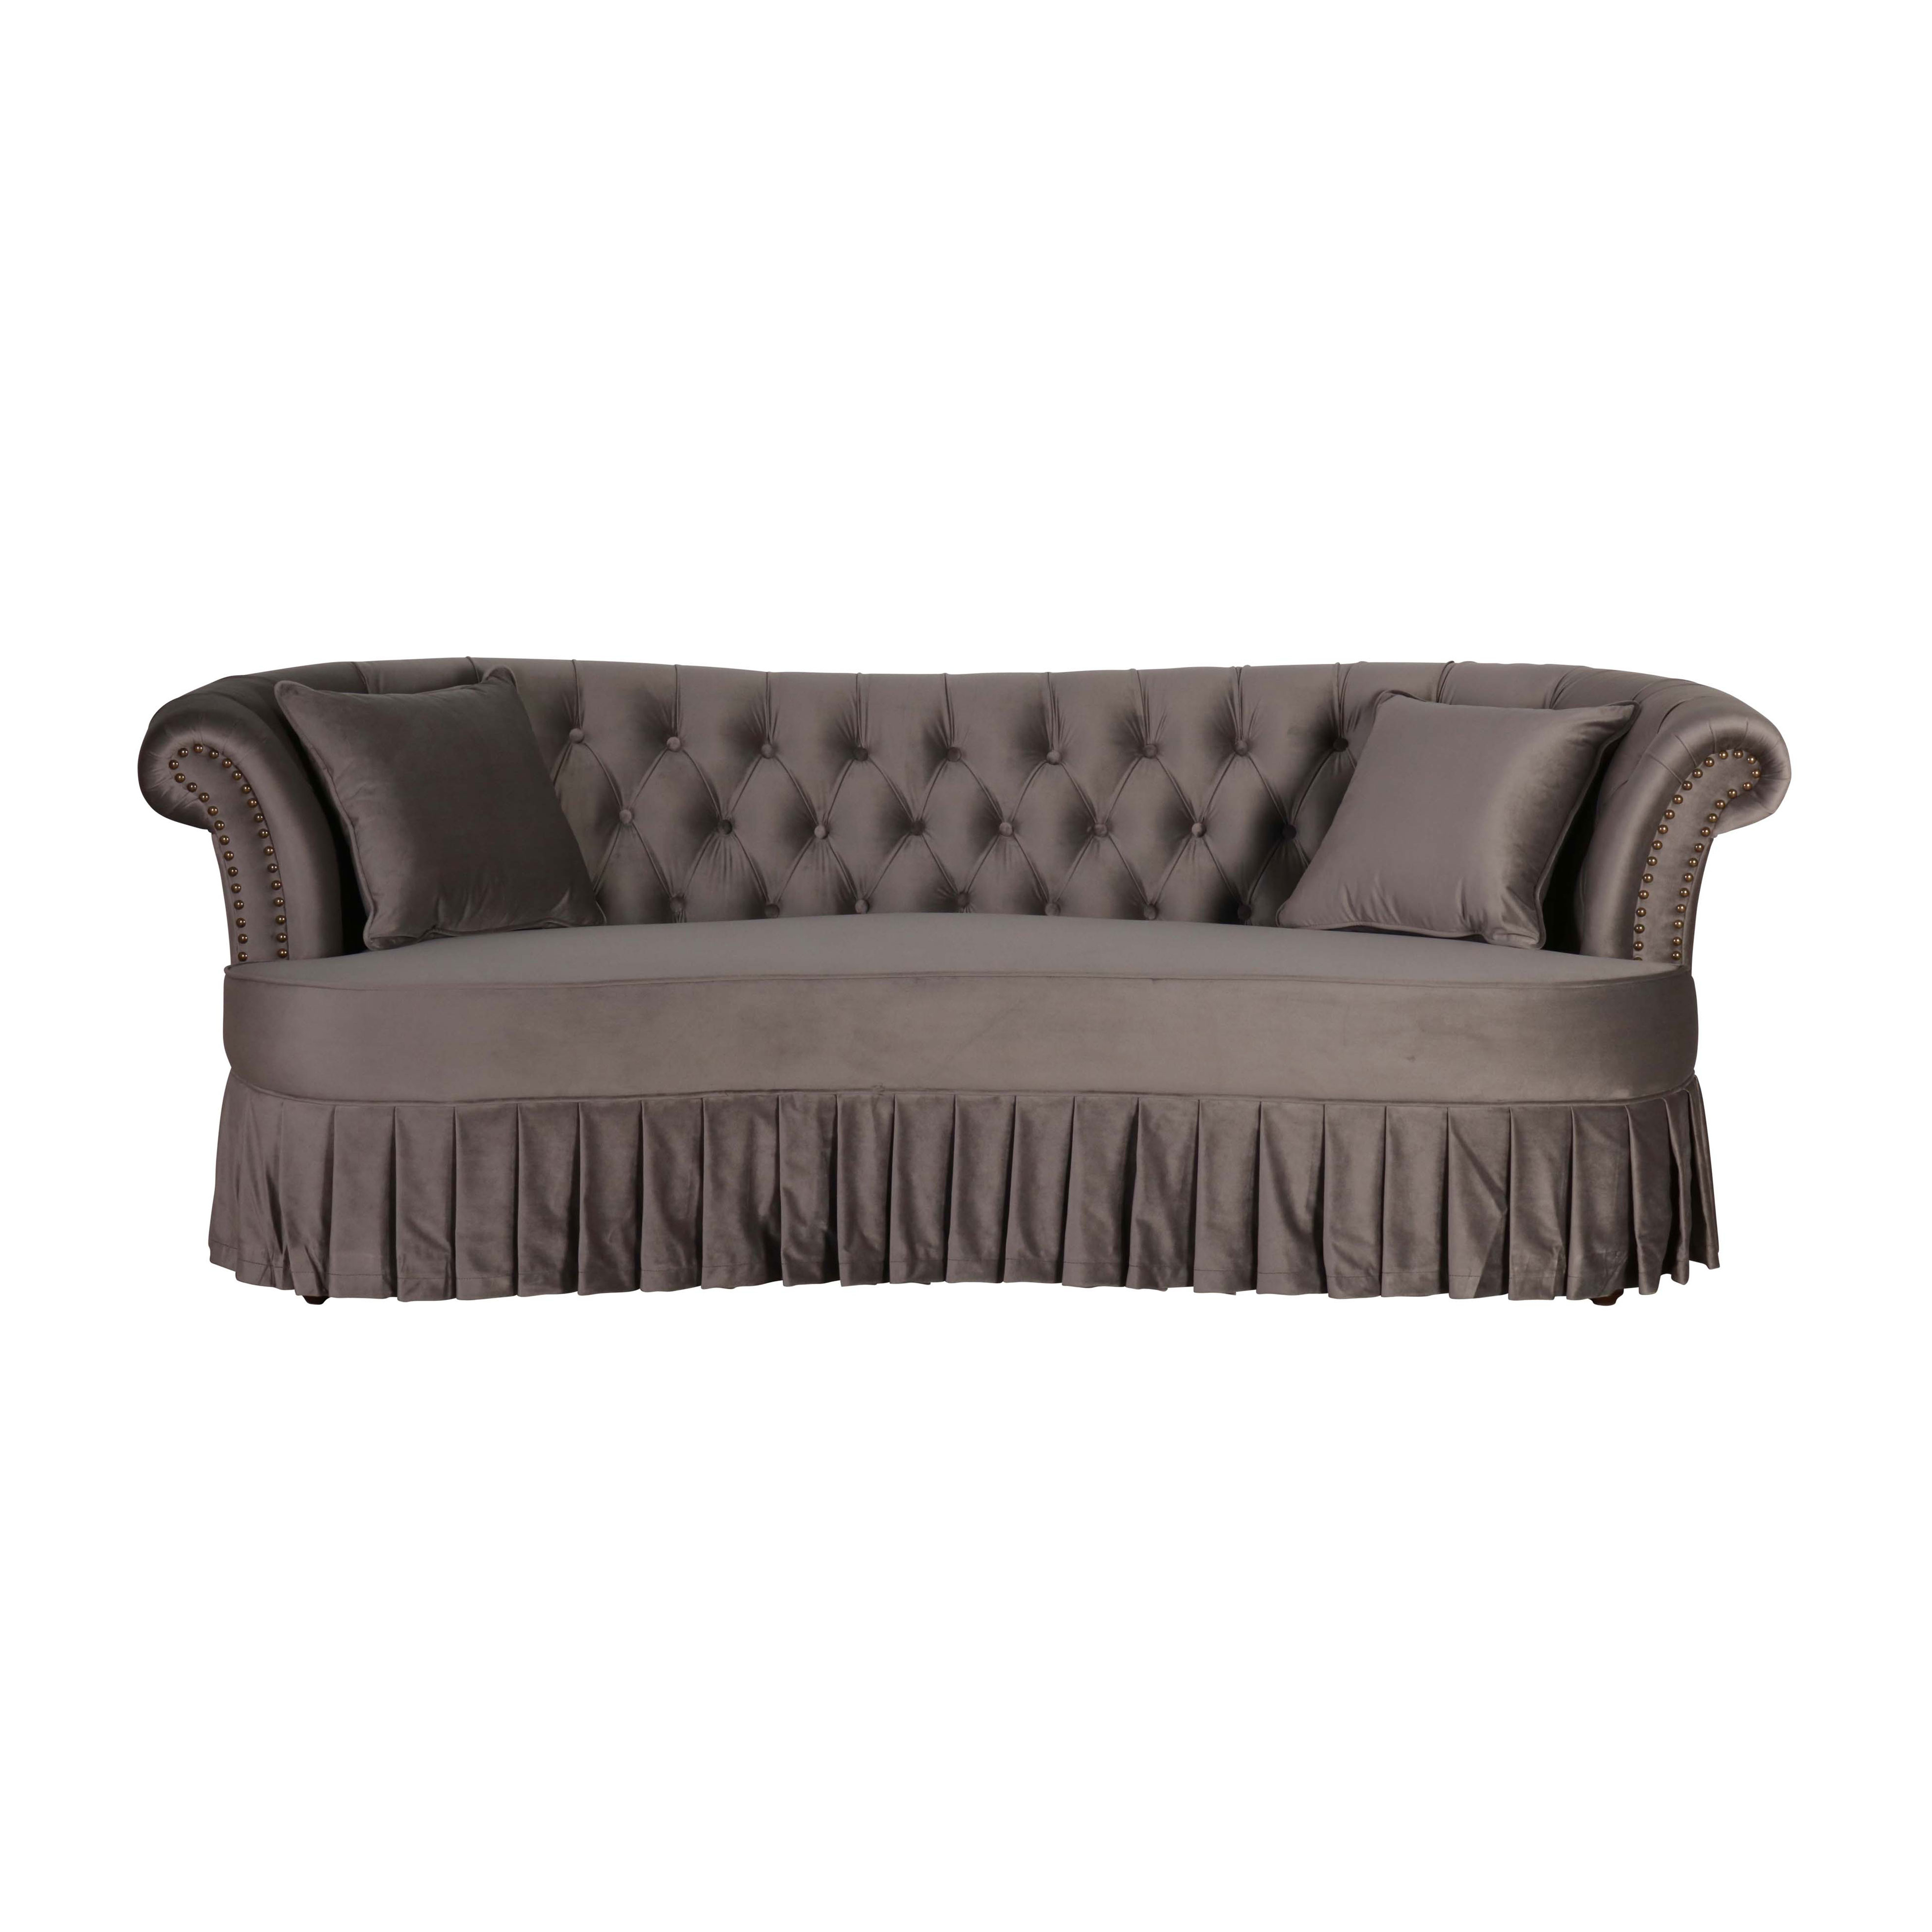 grey velvet french style sofa with deep buttoned back and pleated skirt detail